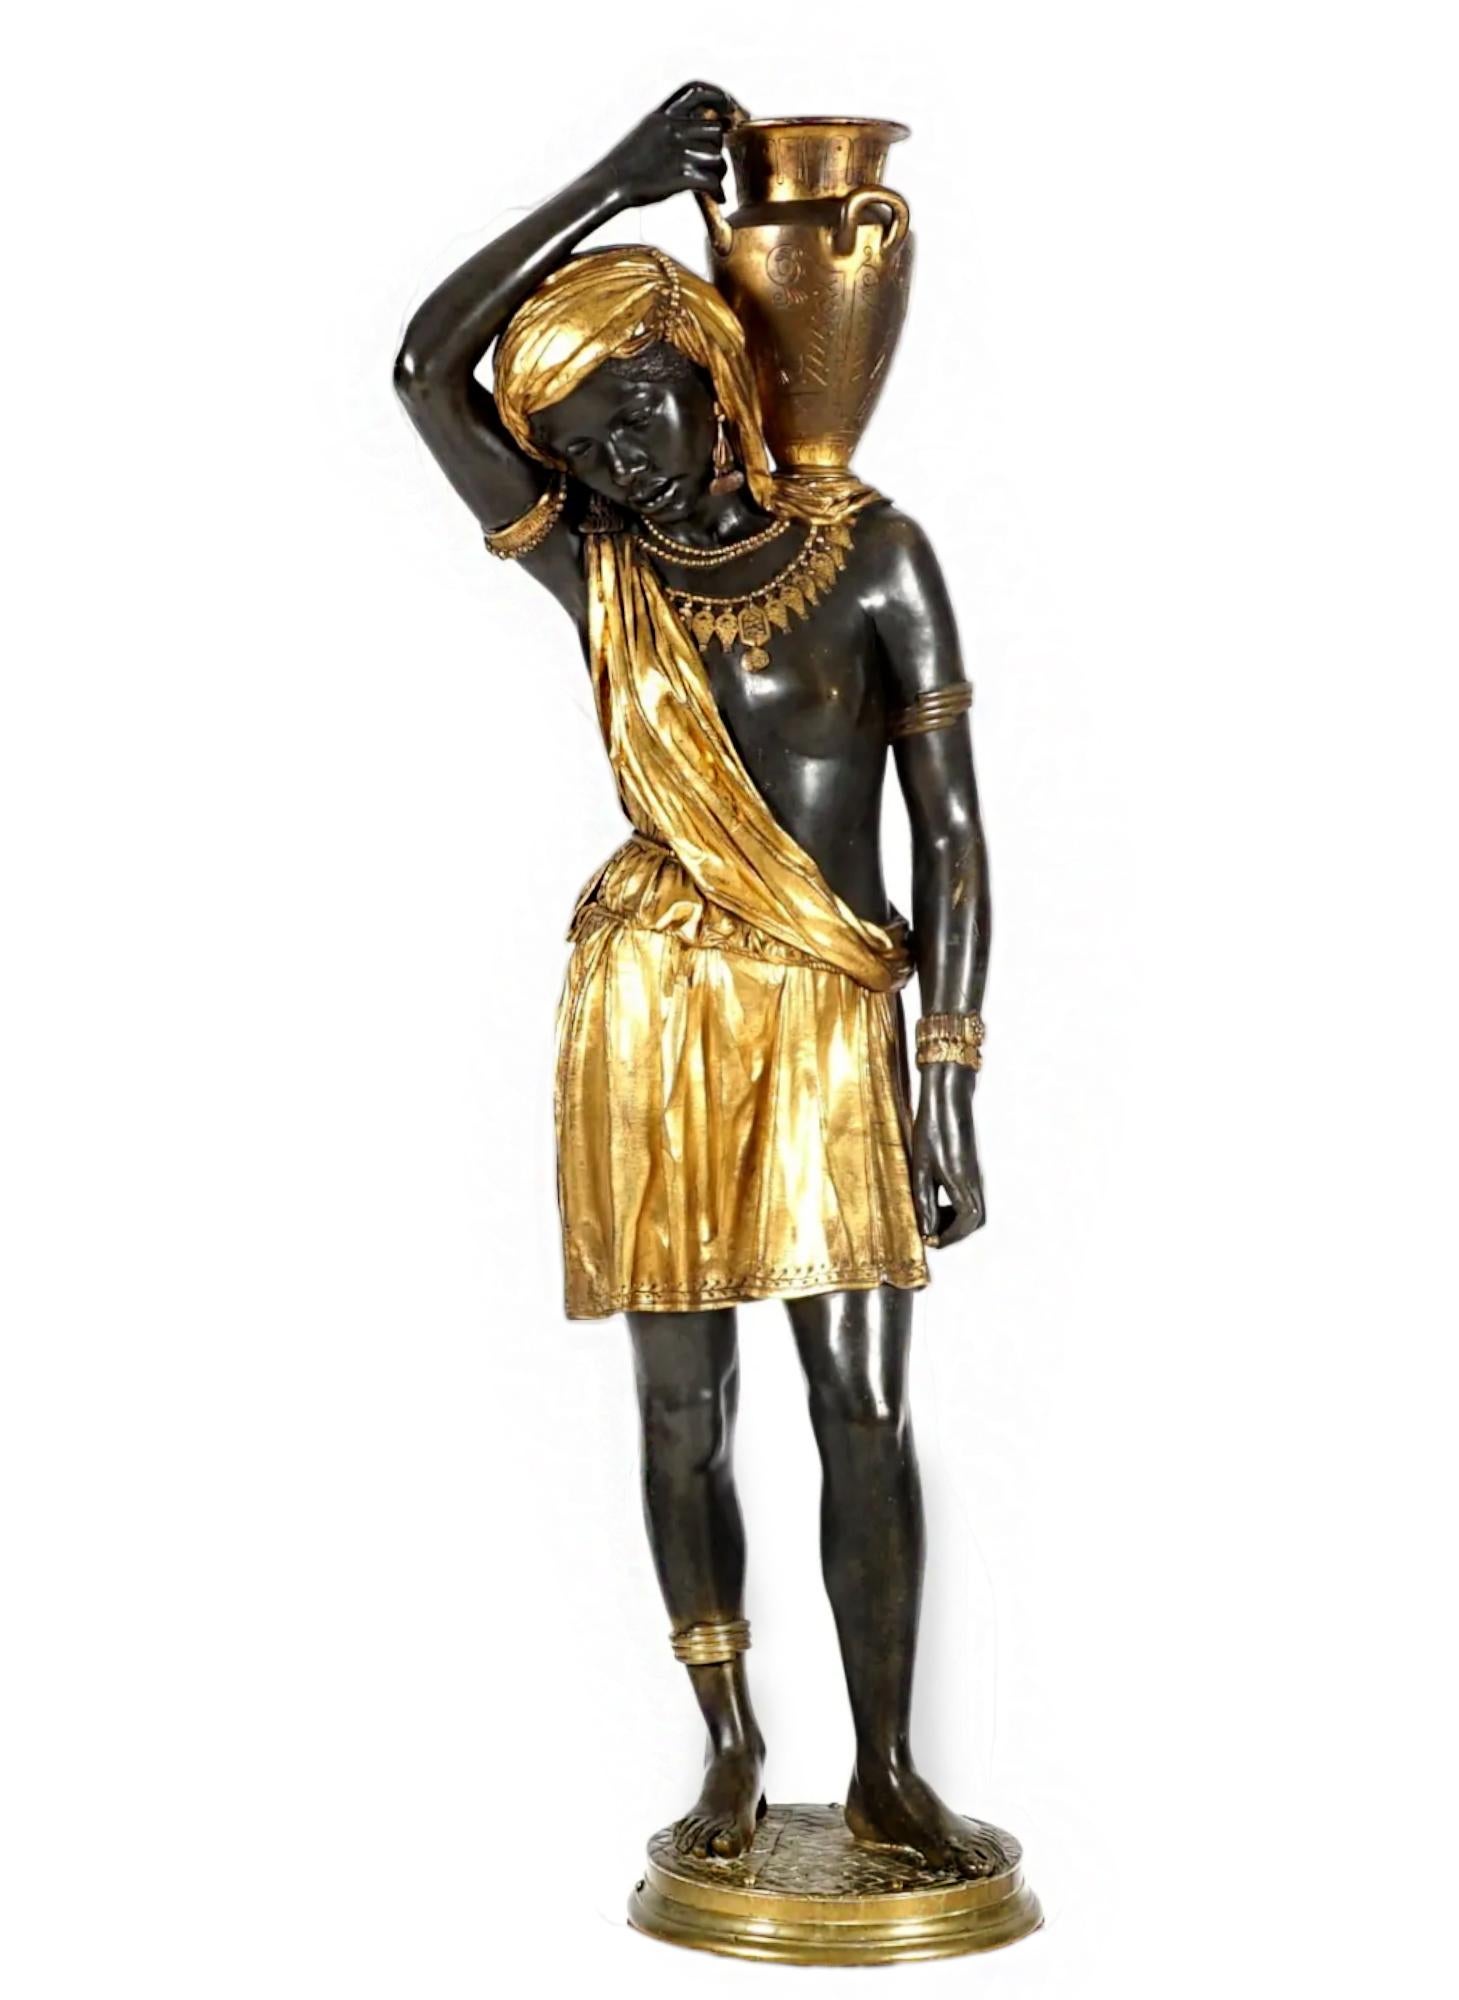 Unknown Figurative Sculpture - Nubian Water Carrier in Gilt & Patinated Bronze Attributed Graux-Marly Foundry